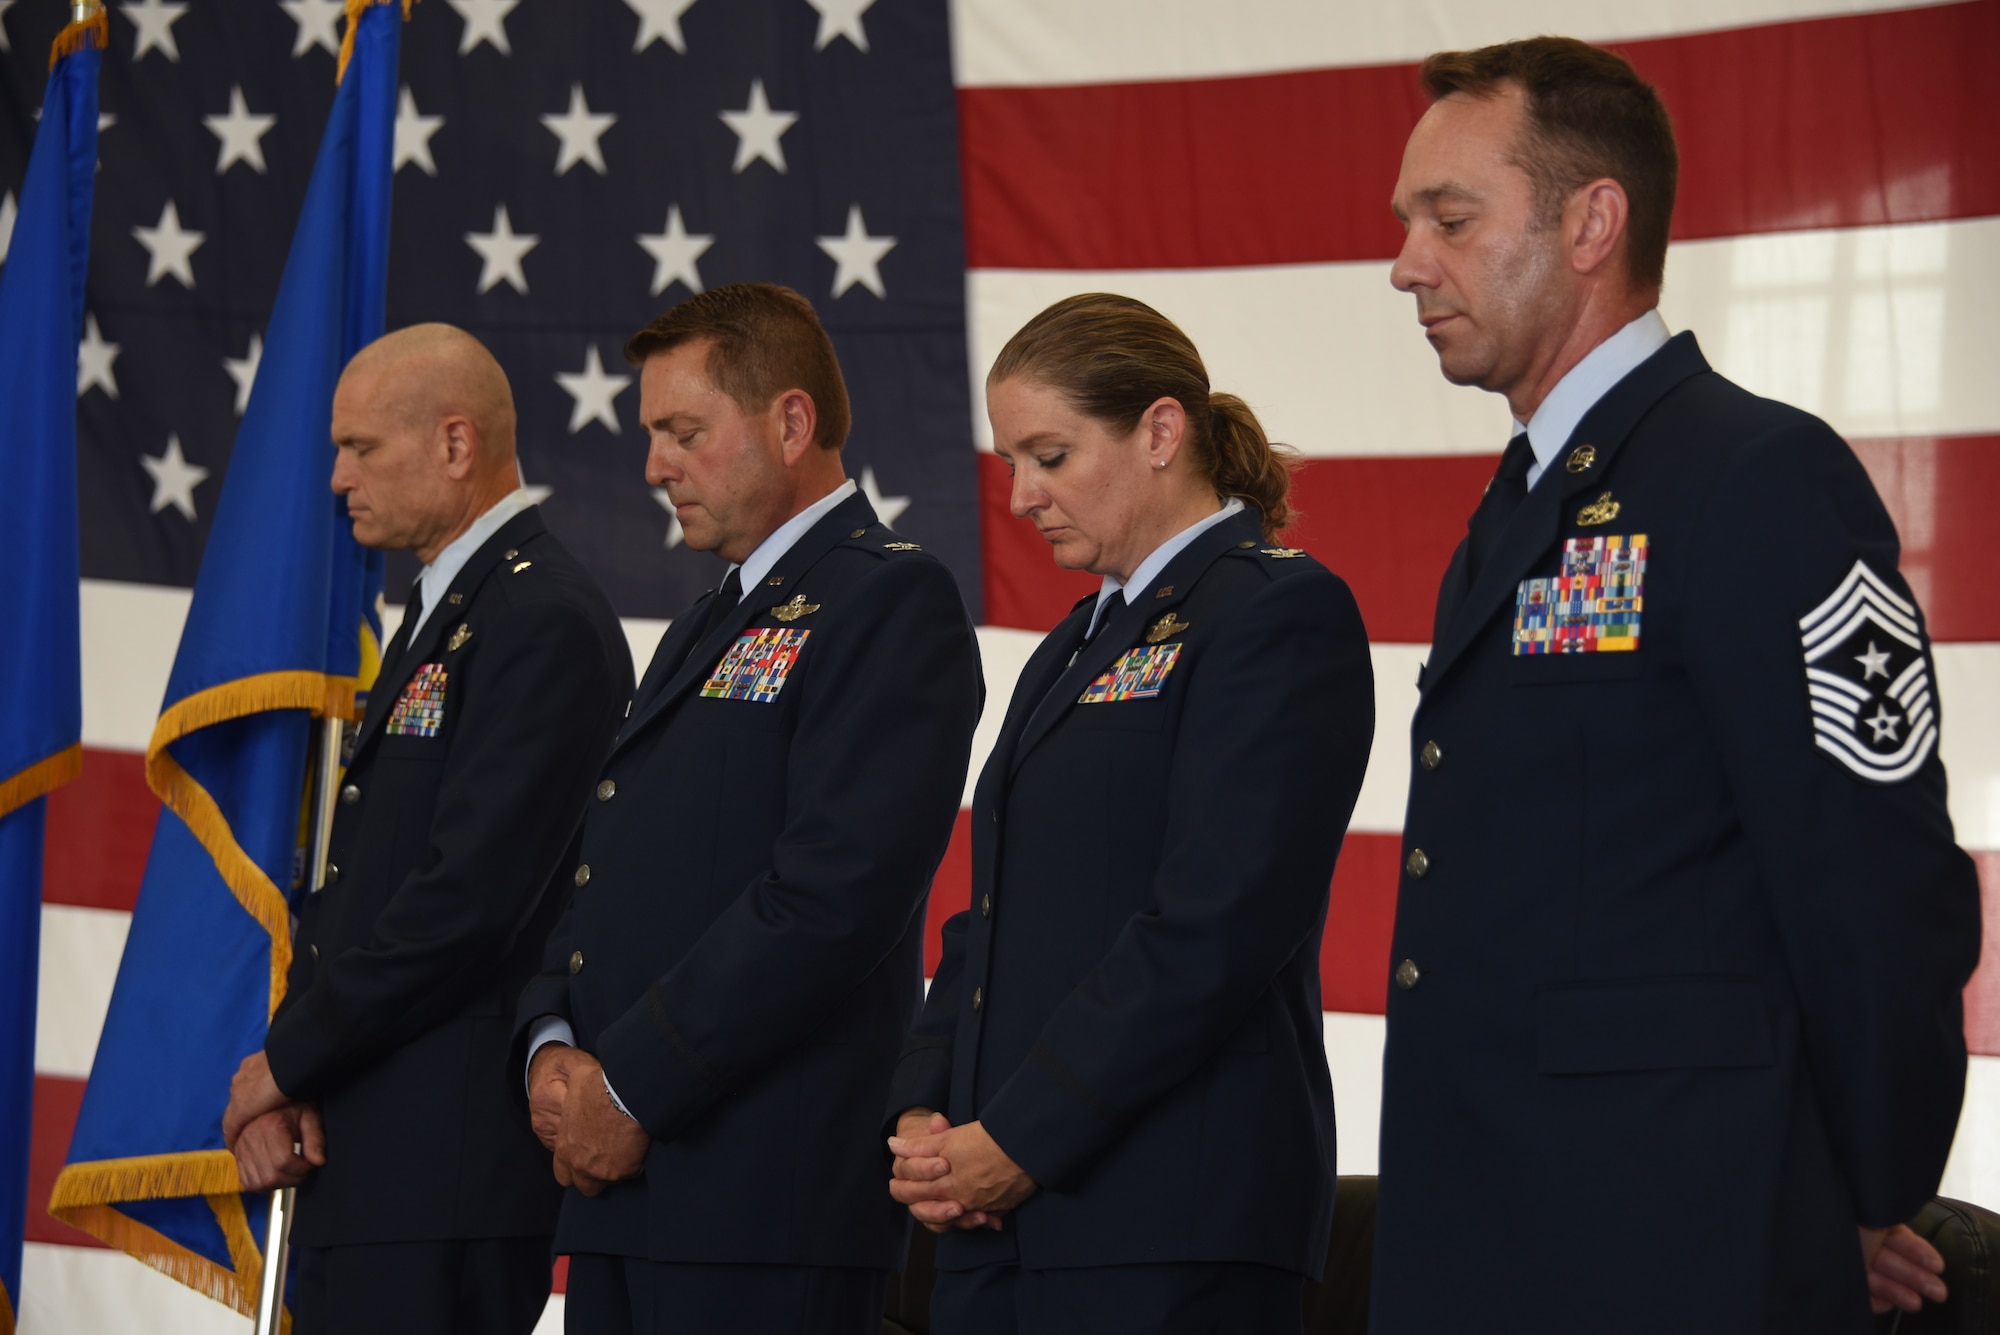 Pictured left to right, Brig. Gen. Shawn Ford, Col. Mark Muckey, Col. Sonya Morrison and Command Chief Ron Lorenzen bow their heads during the invocation prayer